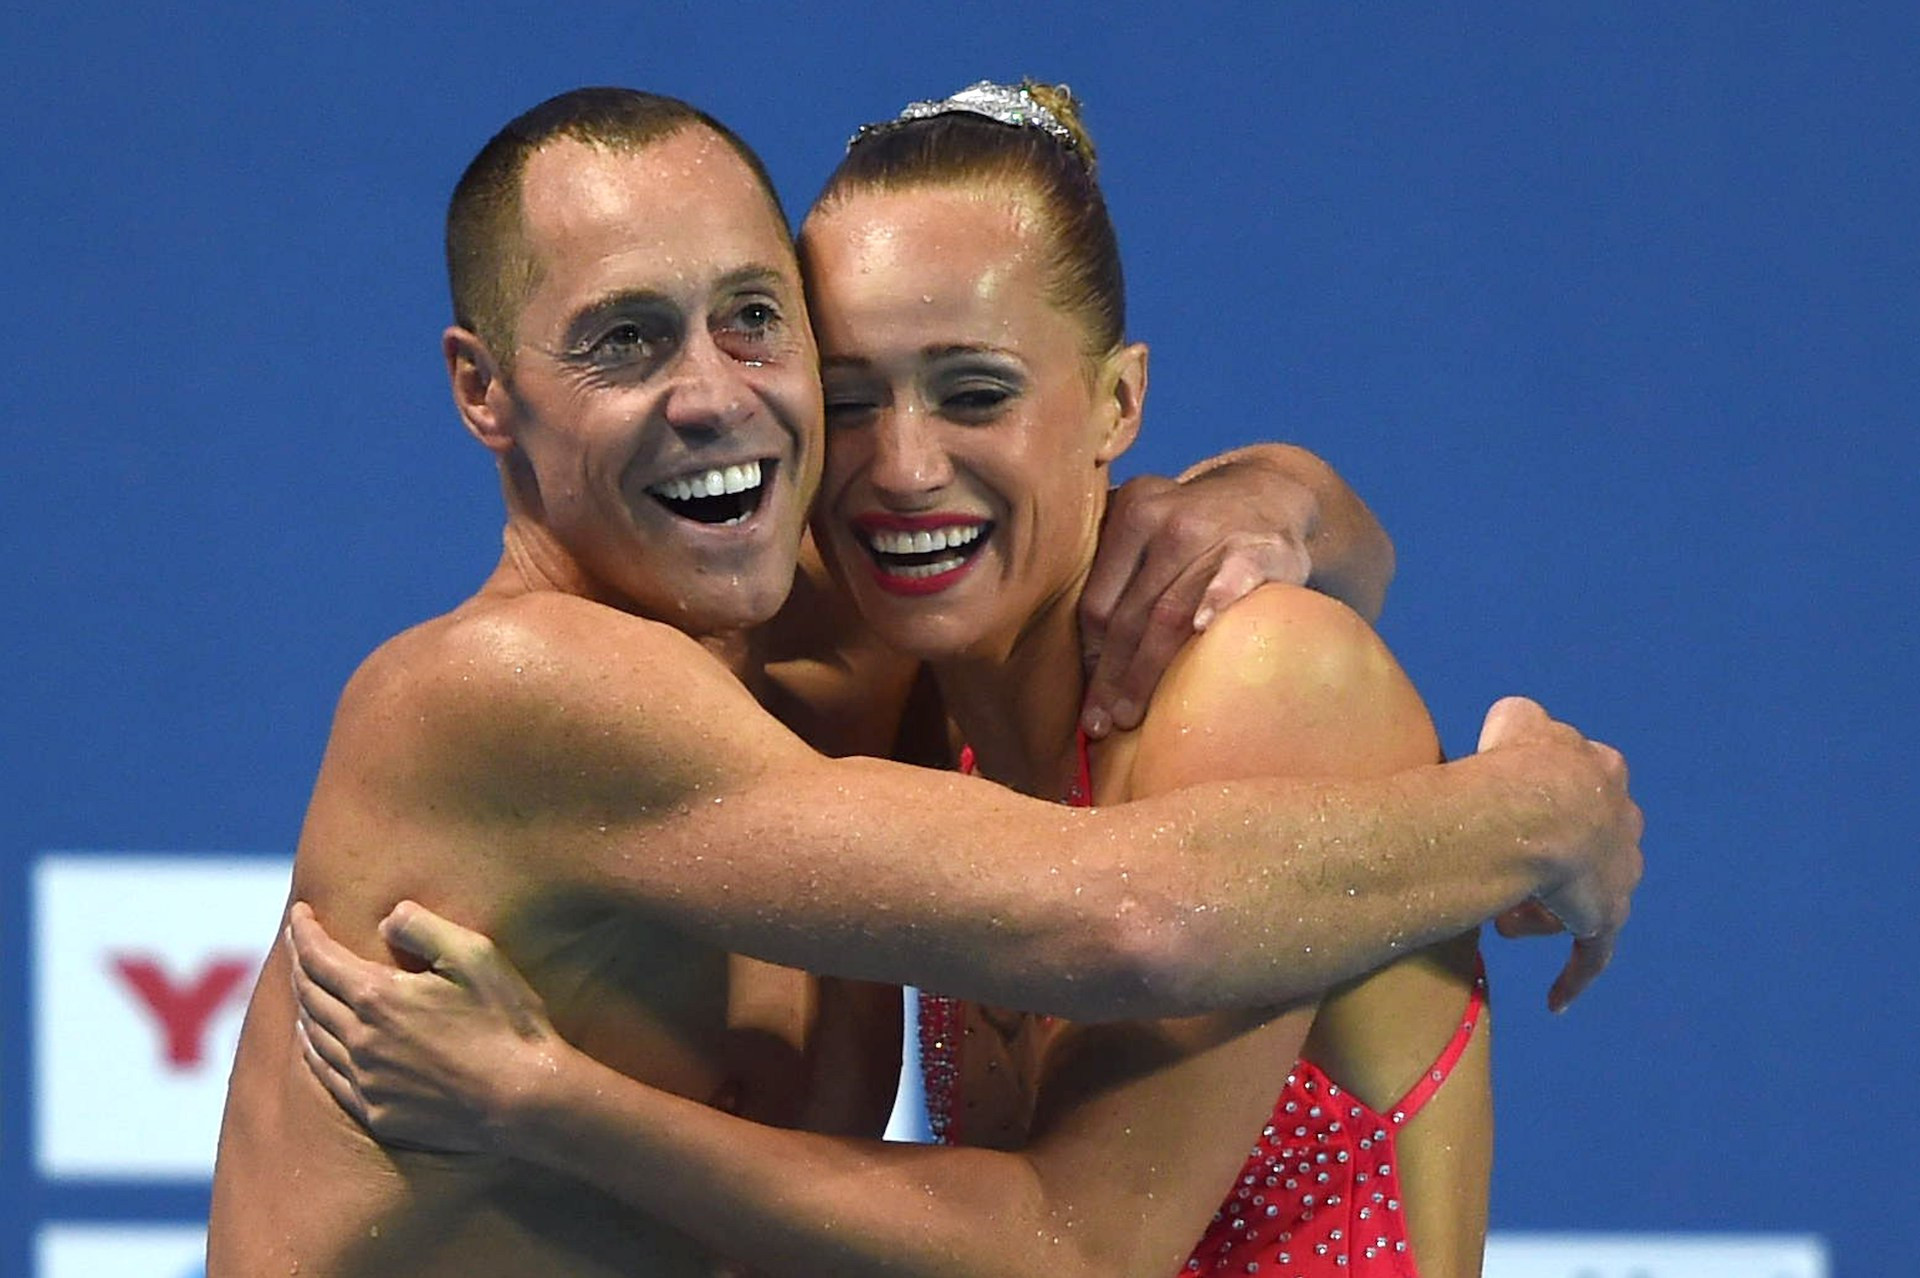 Bill May joyfully celebrates with his partner Christina Jones after competing in the Mixed Duet Technical in Kazan. GETTY IMAGES